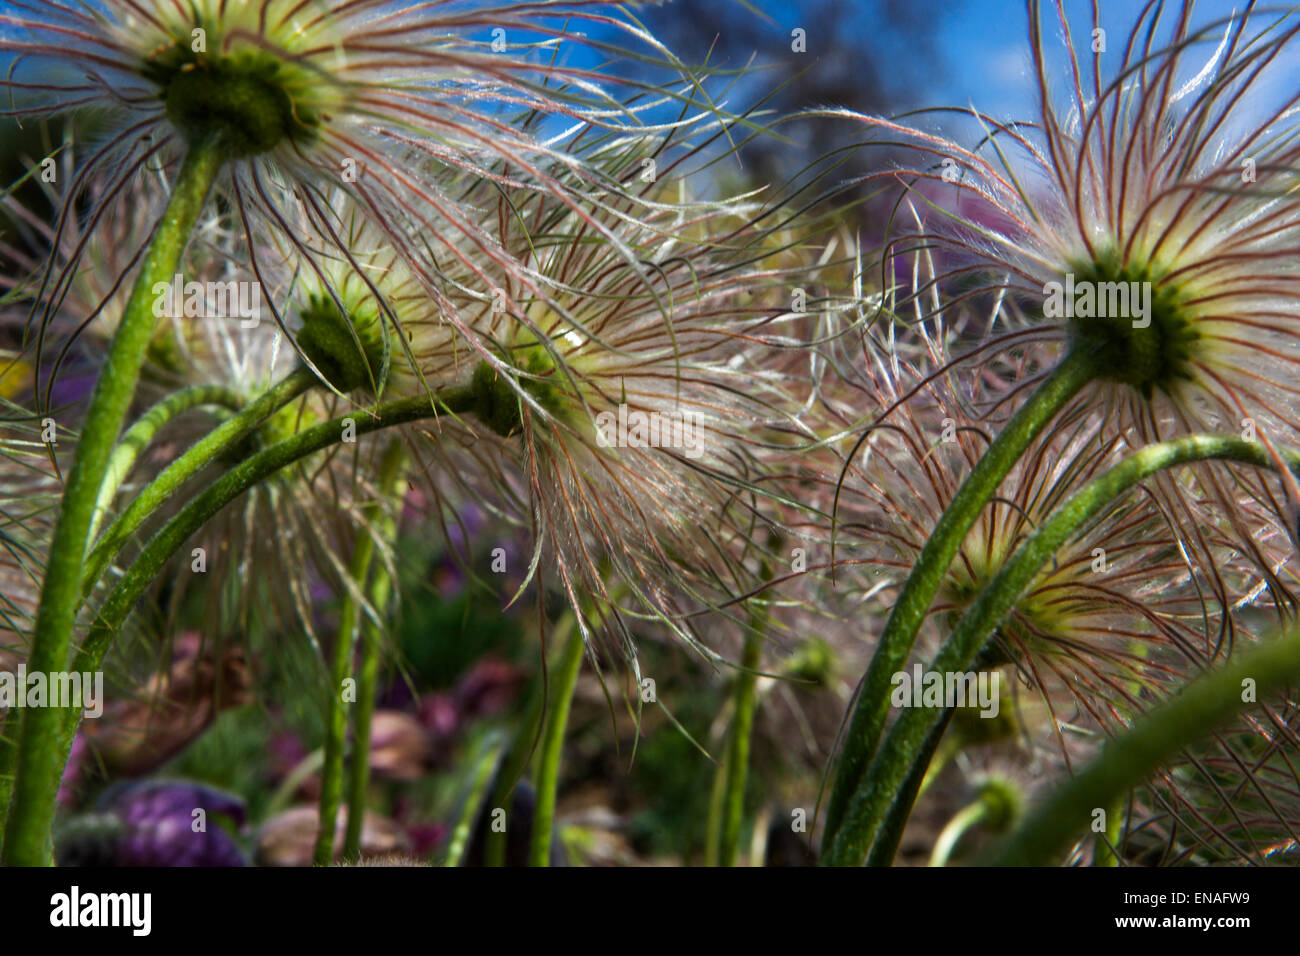 Pasque flower, Pulsatilla seed heads Gone to seed Stock Photo